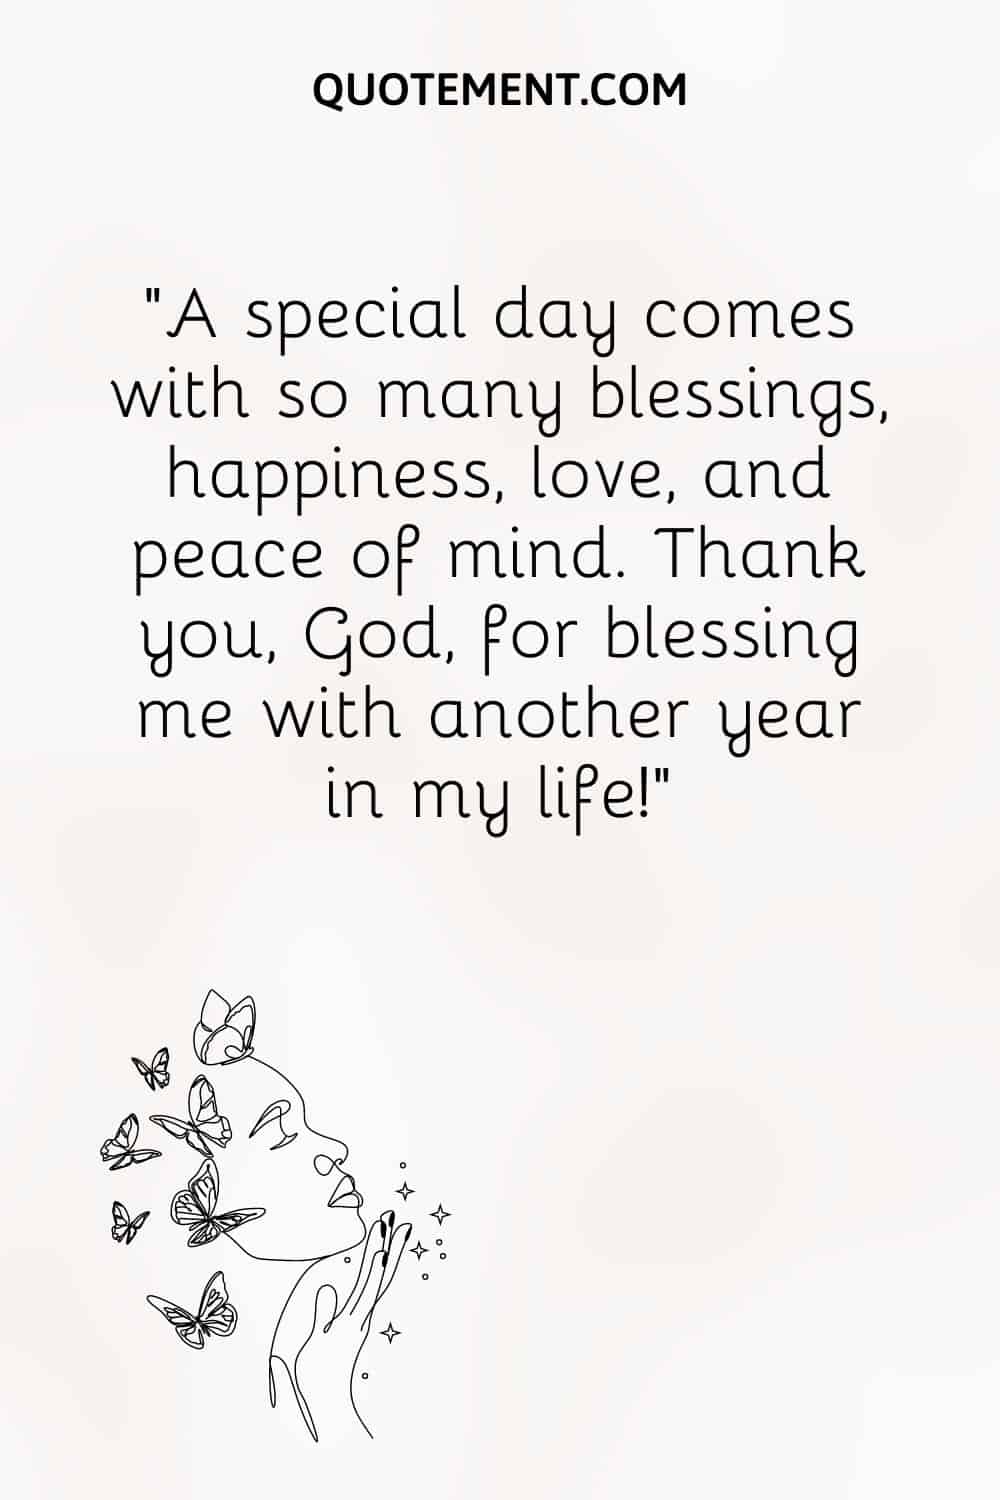 A special day comes with so many blessings, happiness, love, and peace of mind